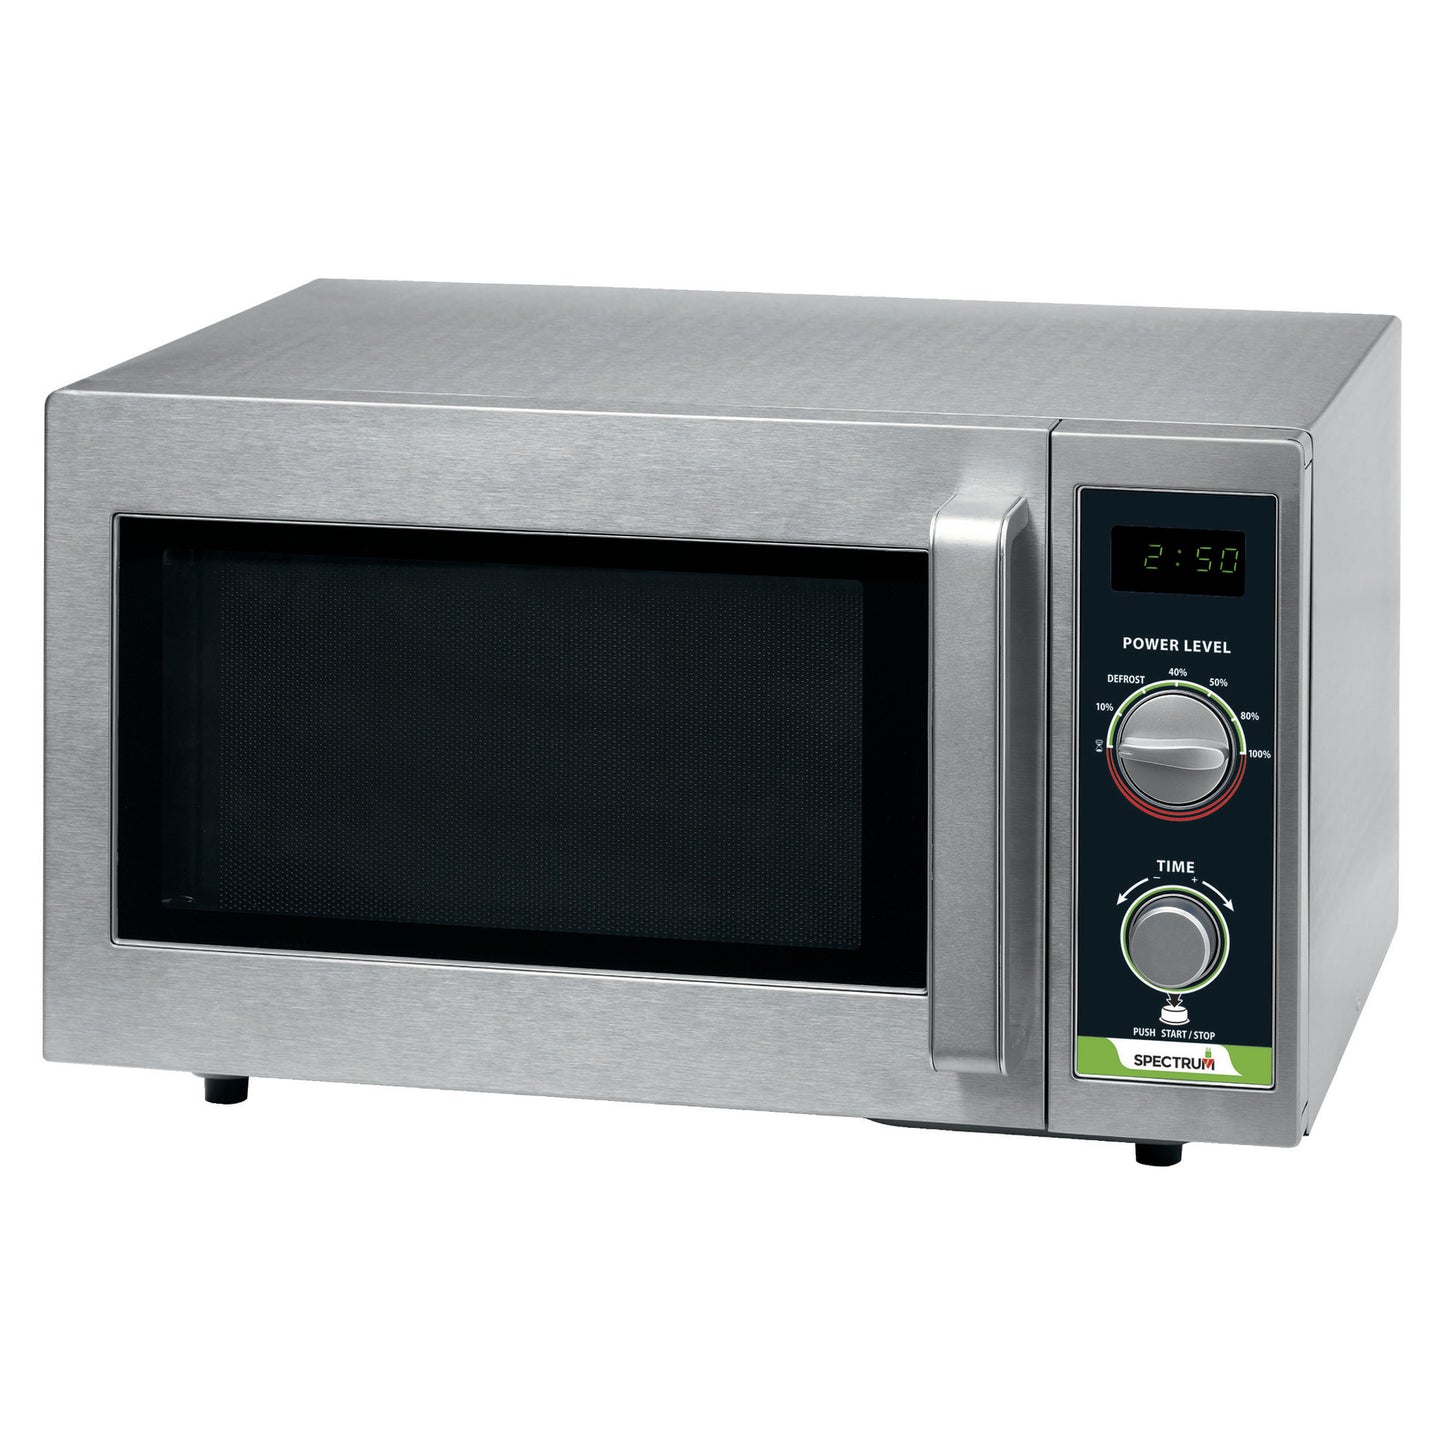 EMW-1000SD - Spectrum Dial Control Commercial Microwave, 1000W